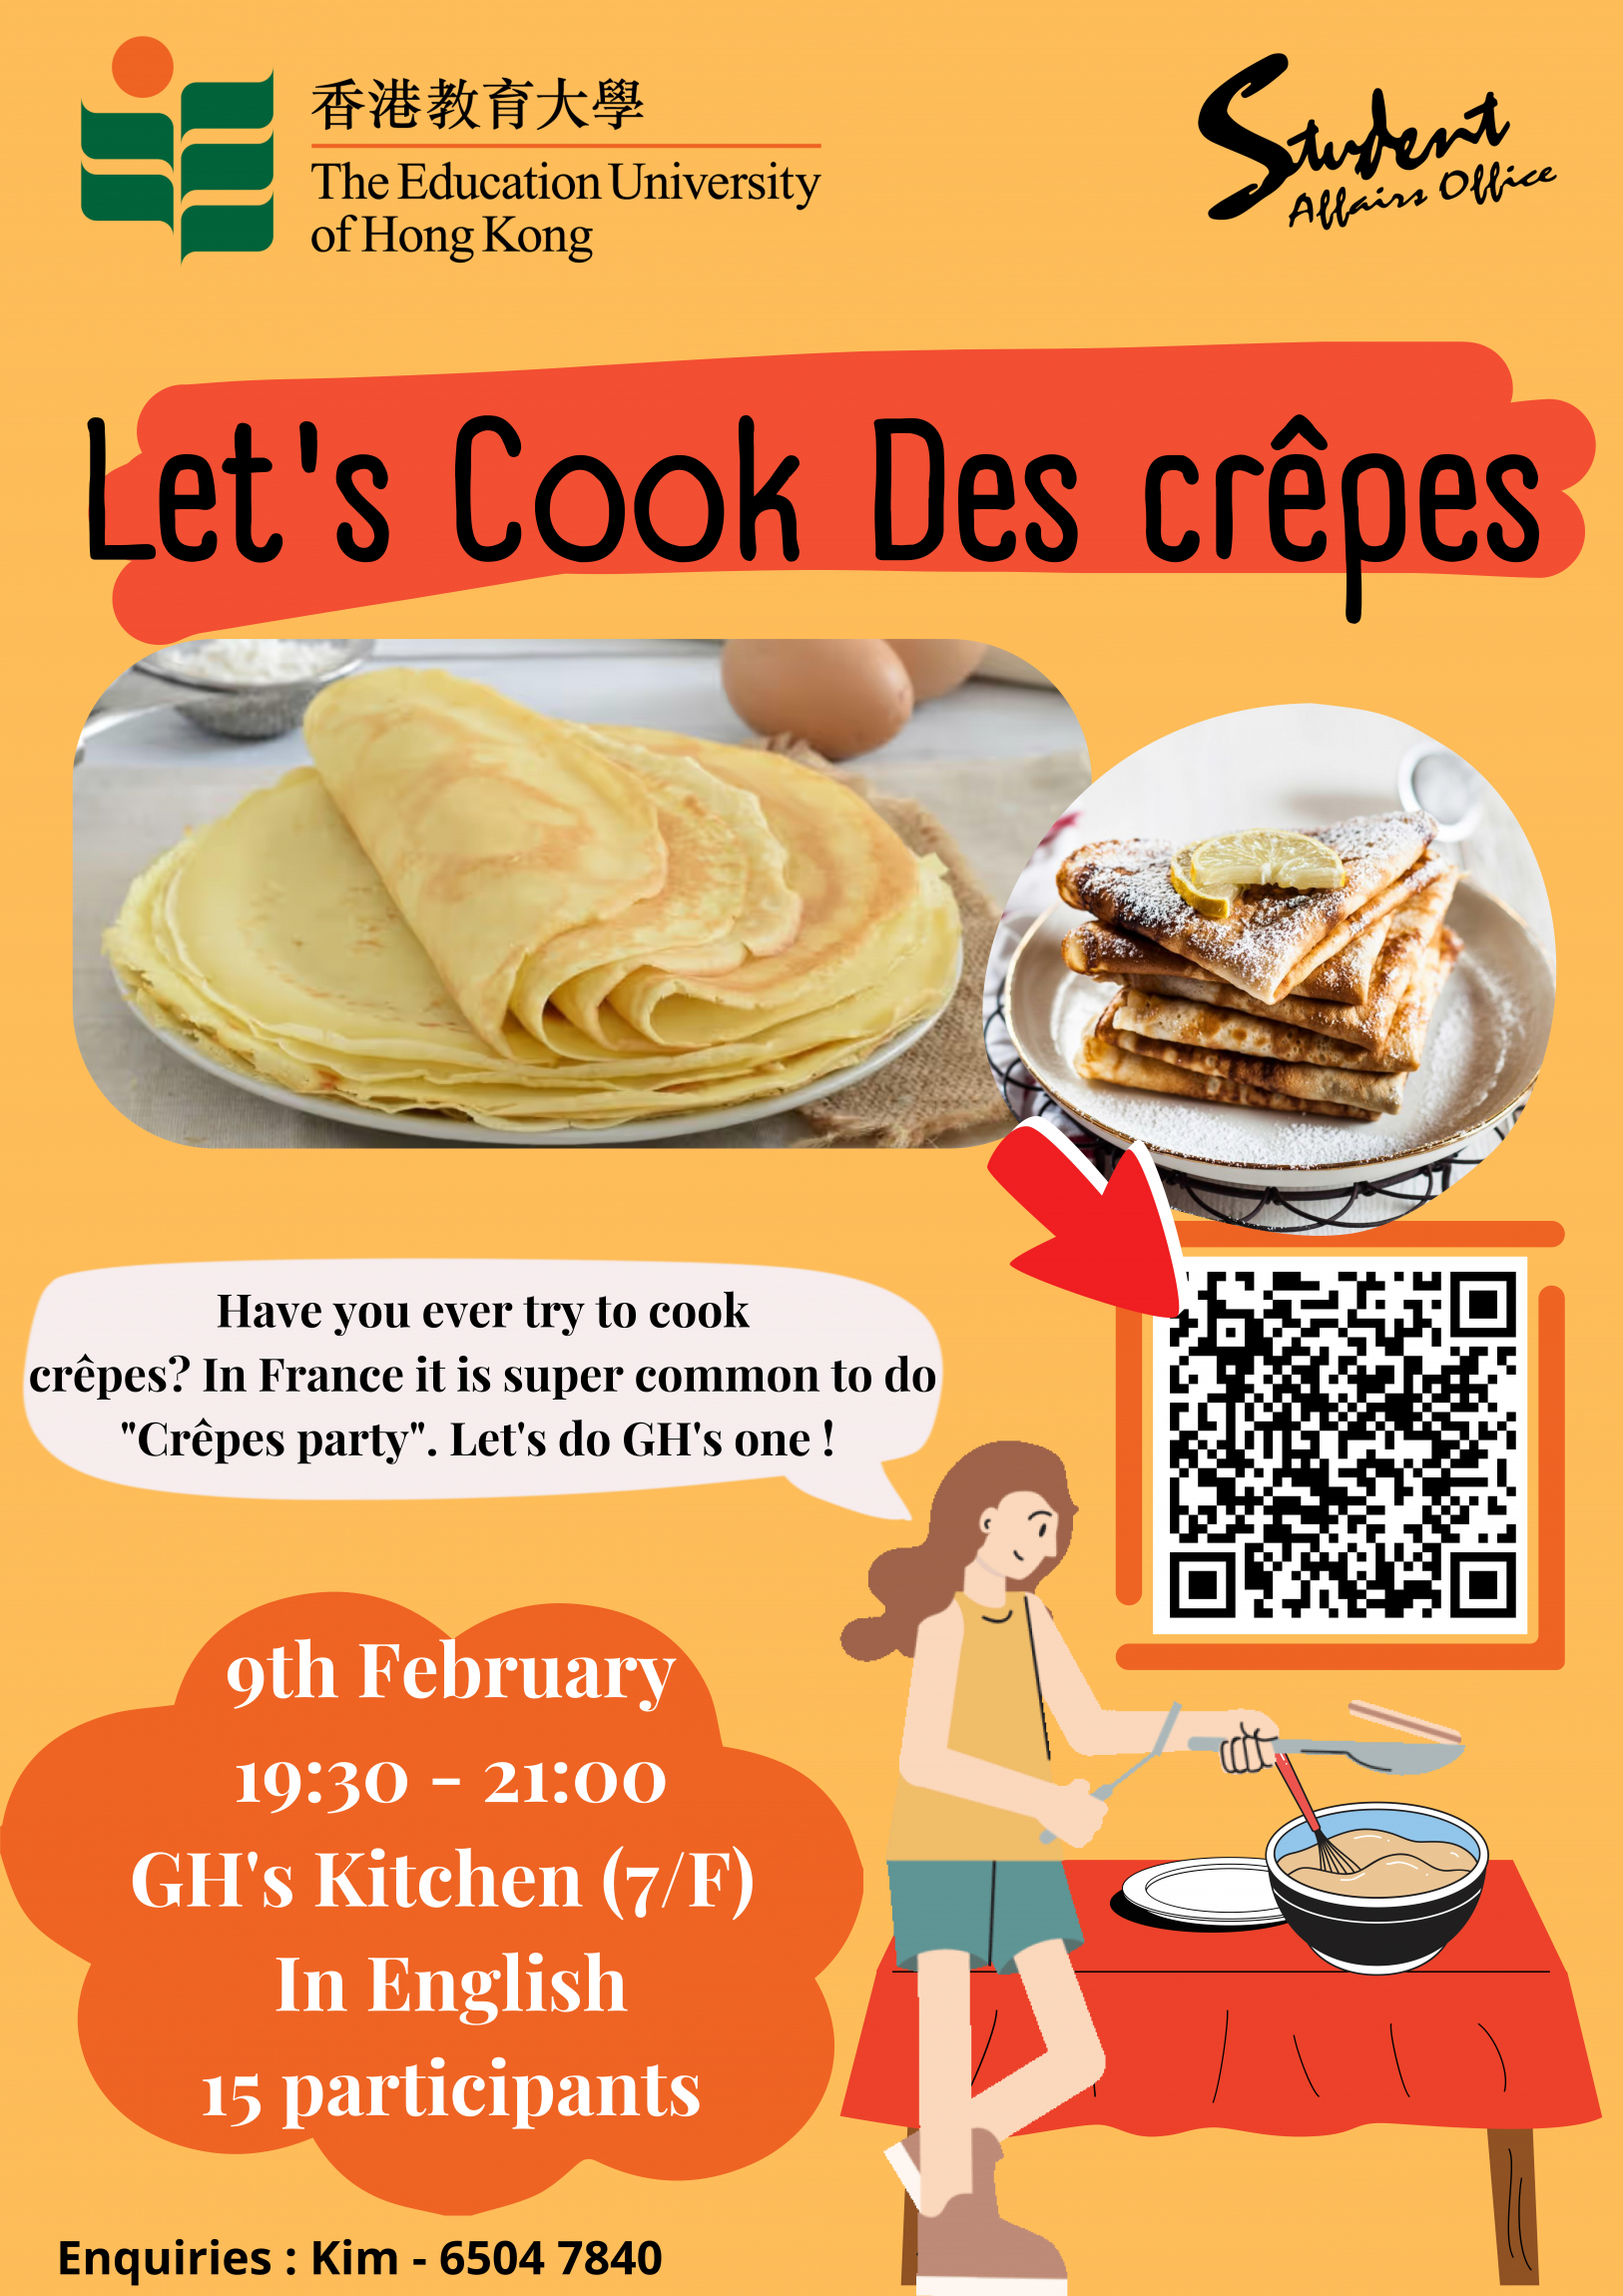 Self Photos / Files - Kimberley_Let's Cook Les Crepes_poster_1 